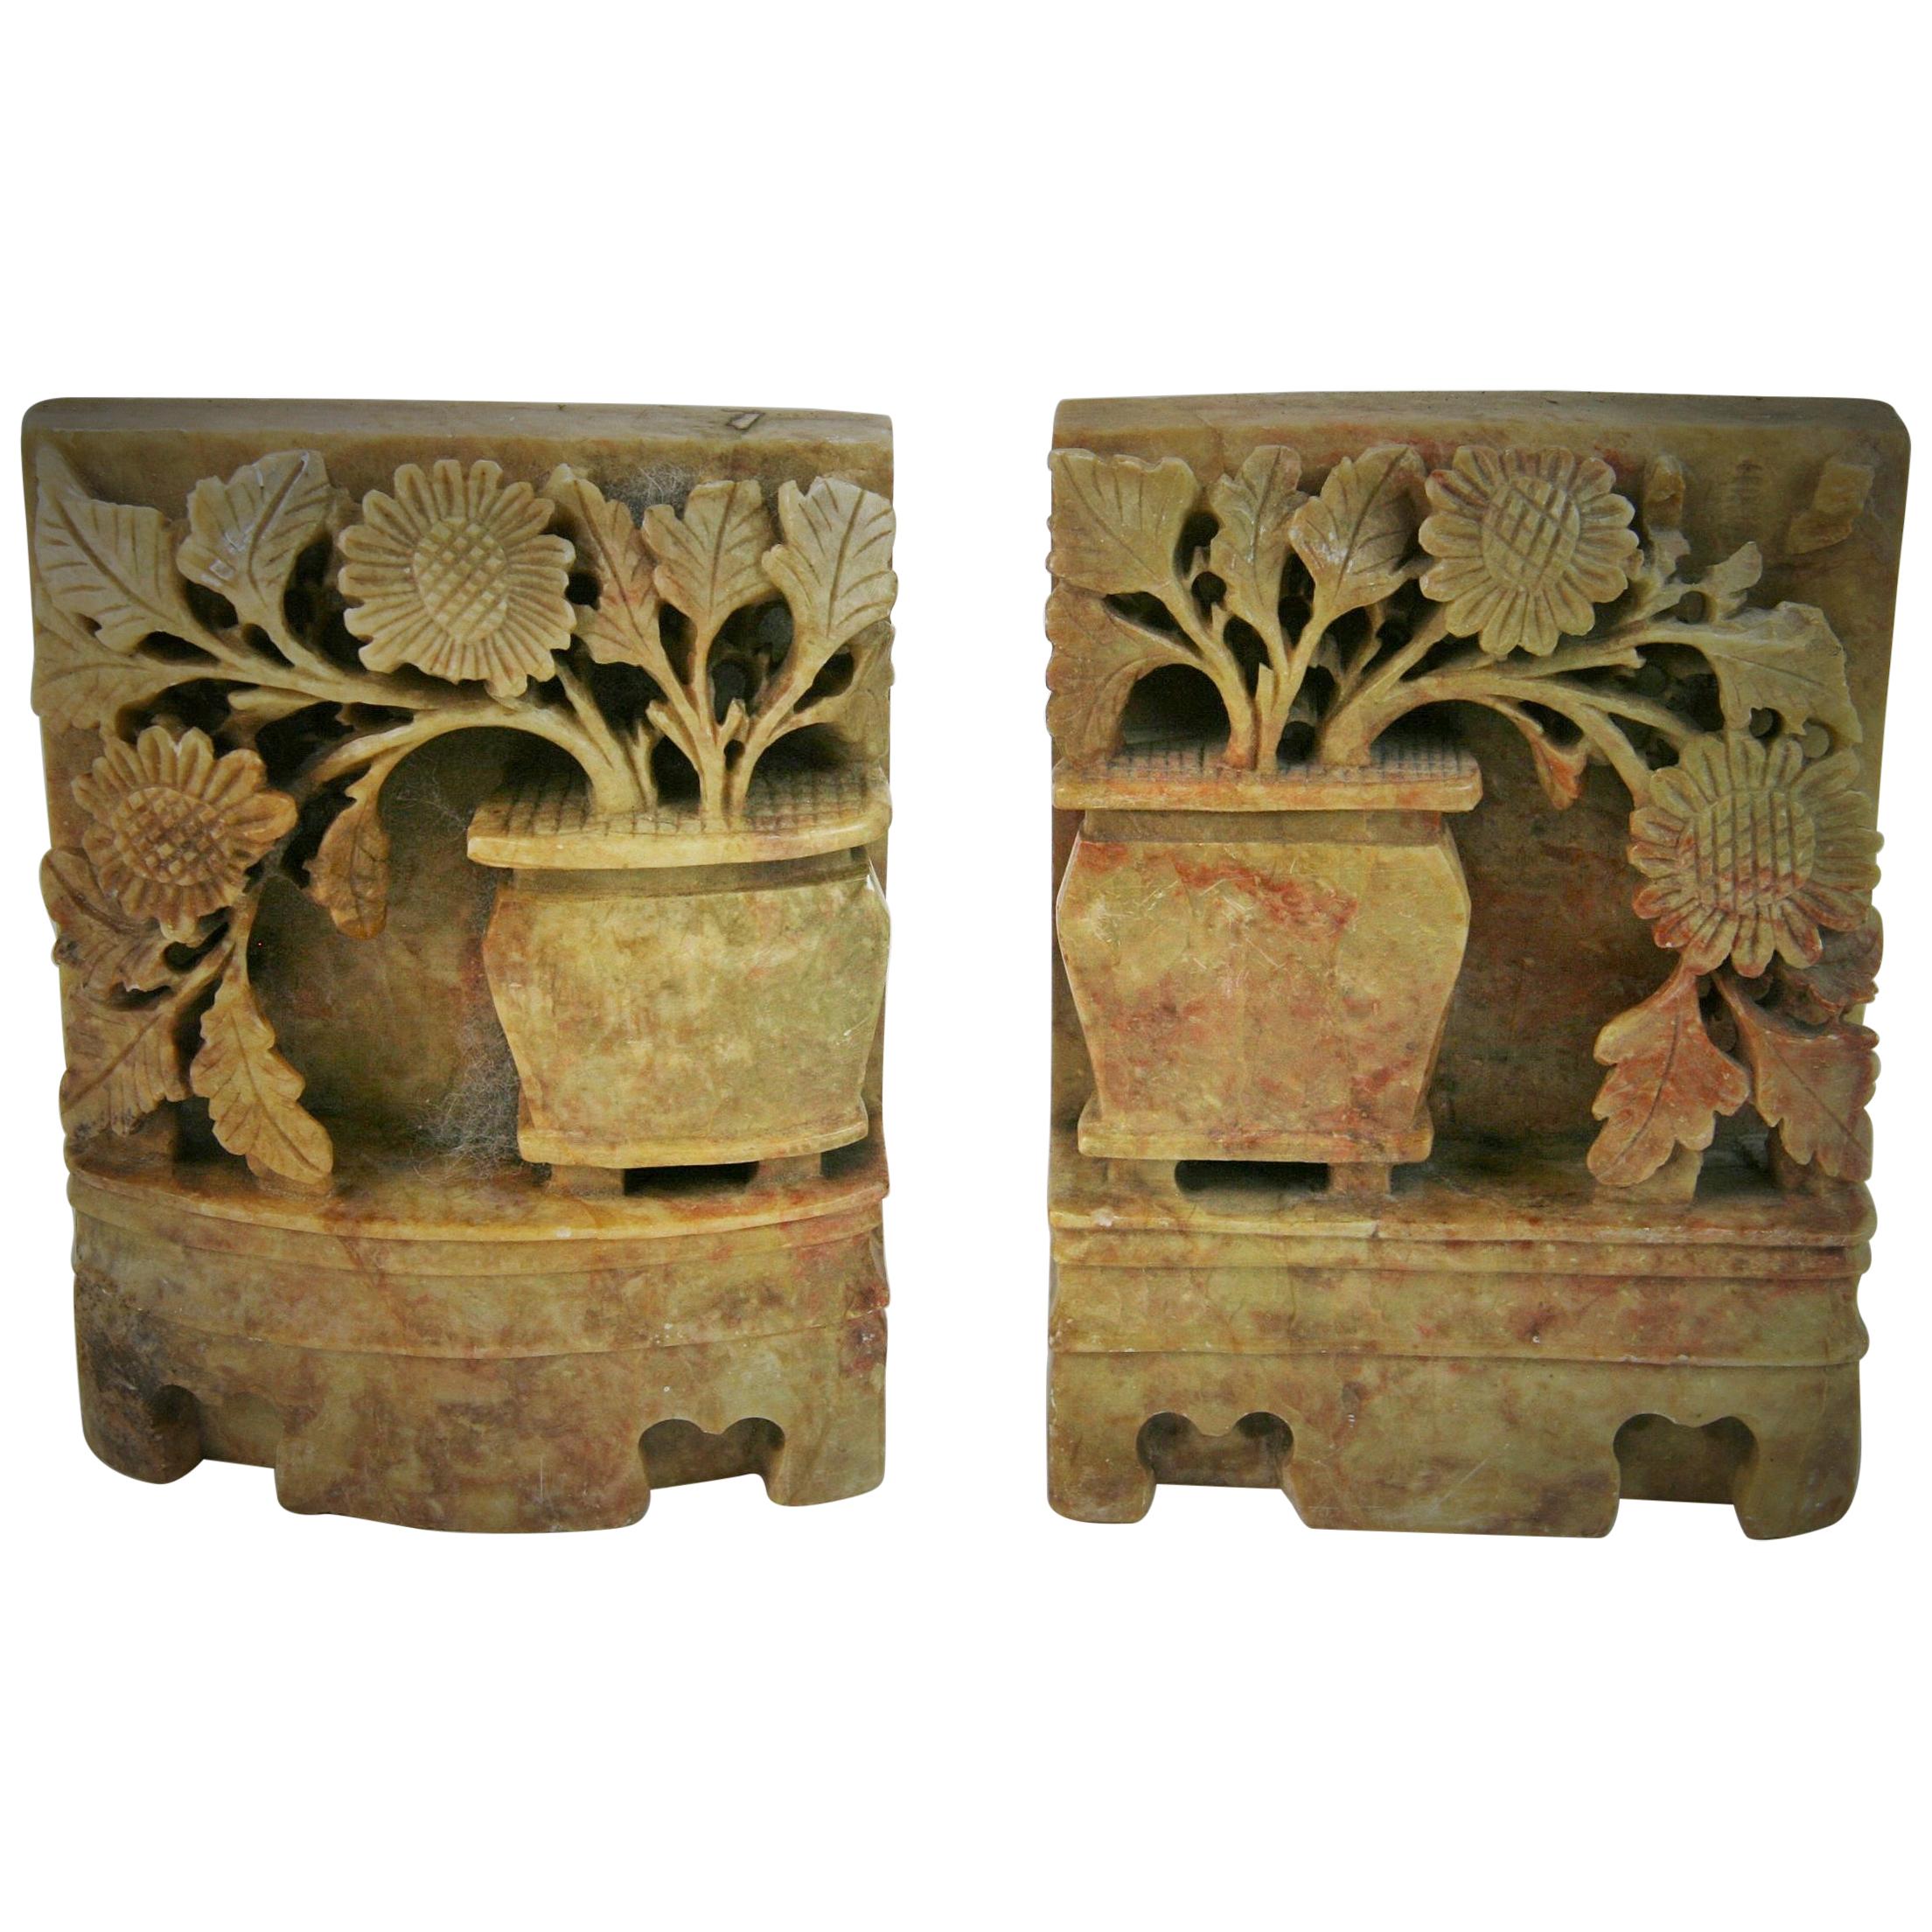 Vintage Pair of  Carved Soapstone Floral Garden Urn Bookends, circa 1930s